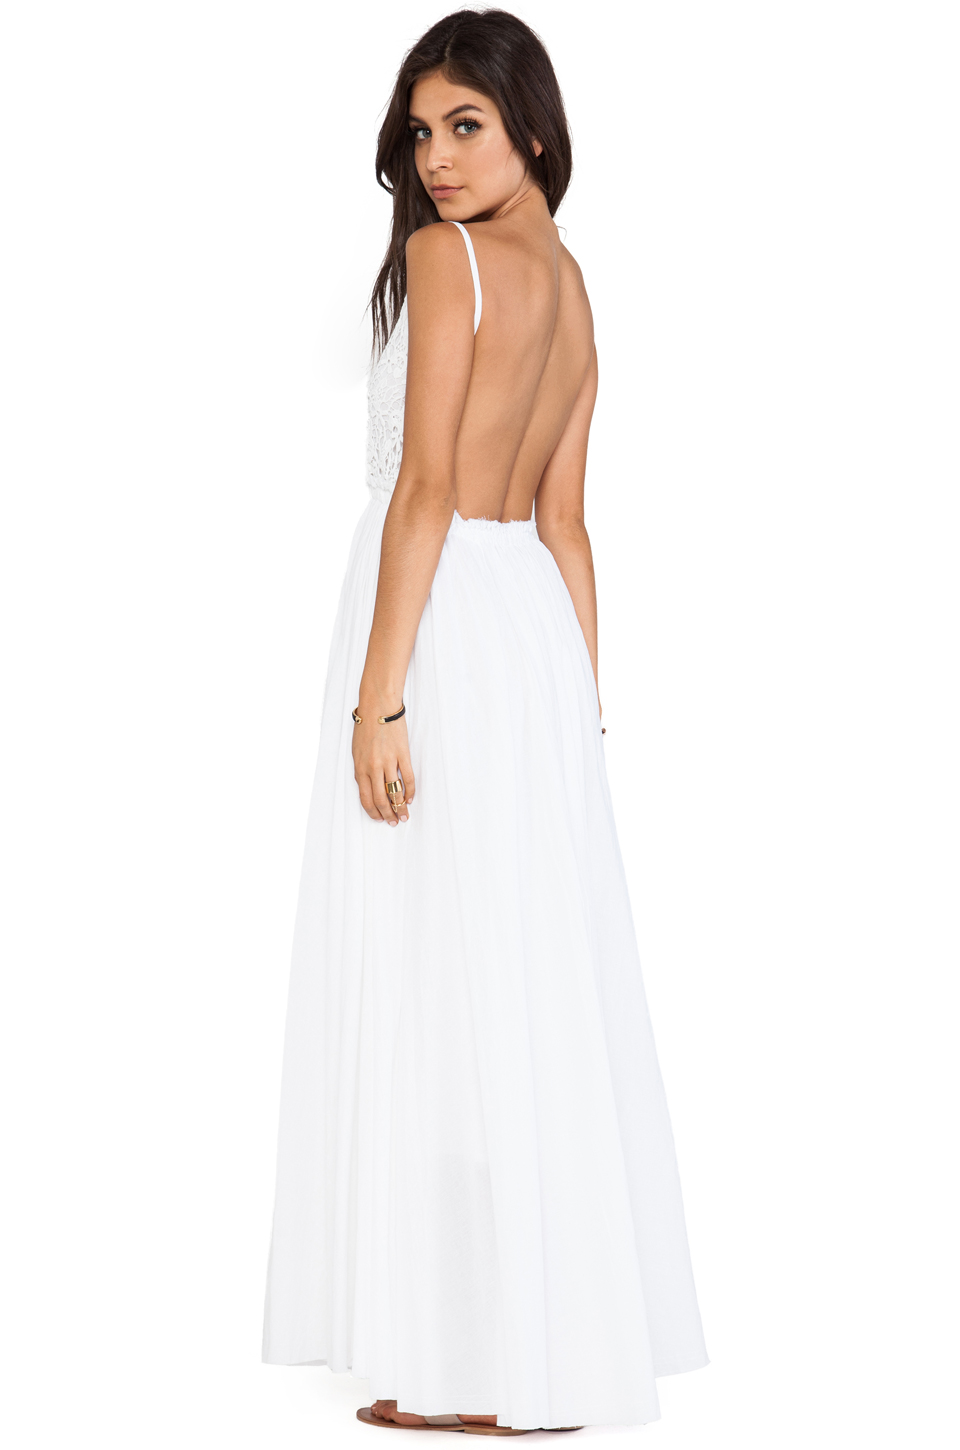 Getting the right backless maxi dress